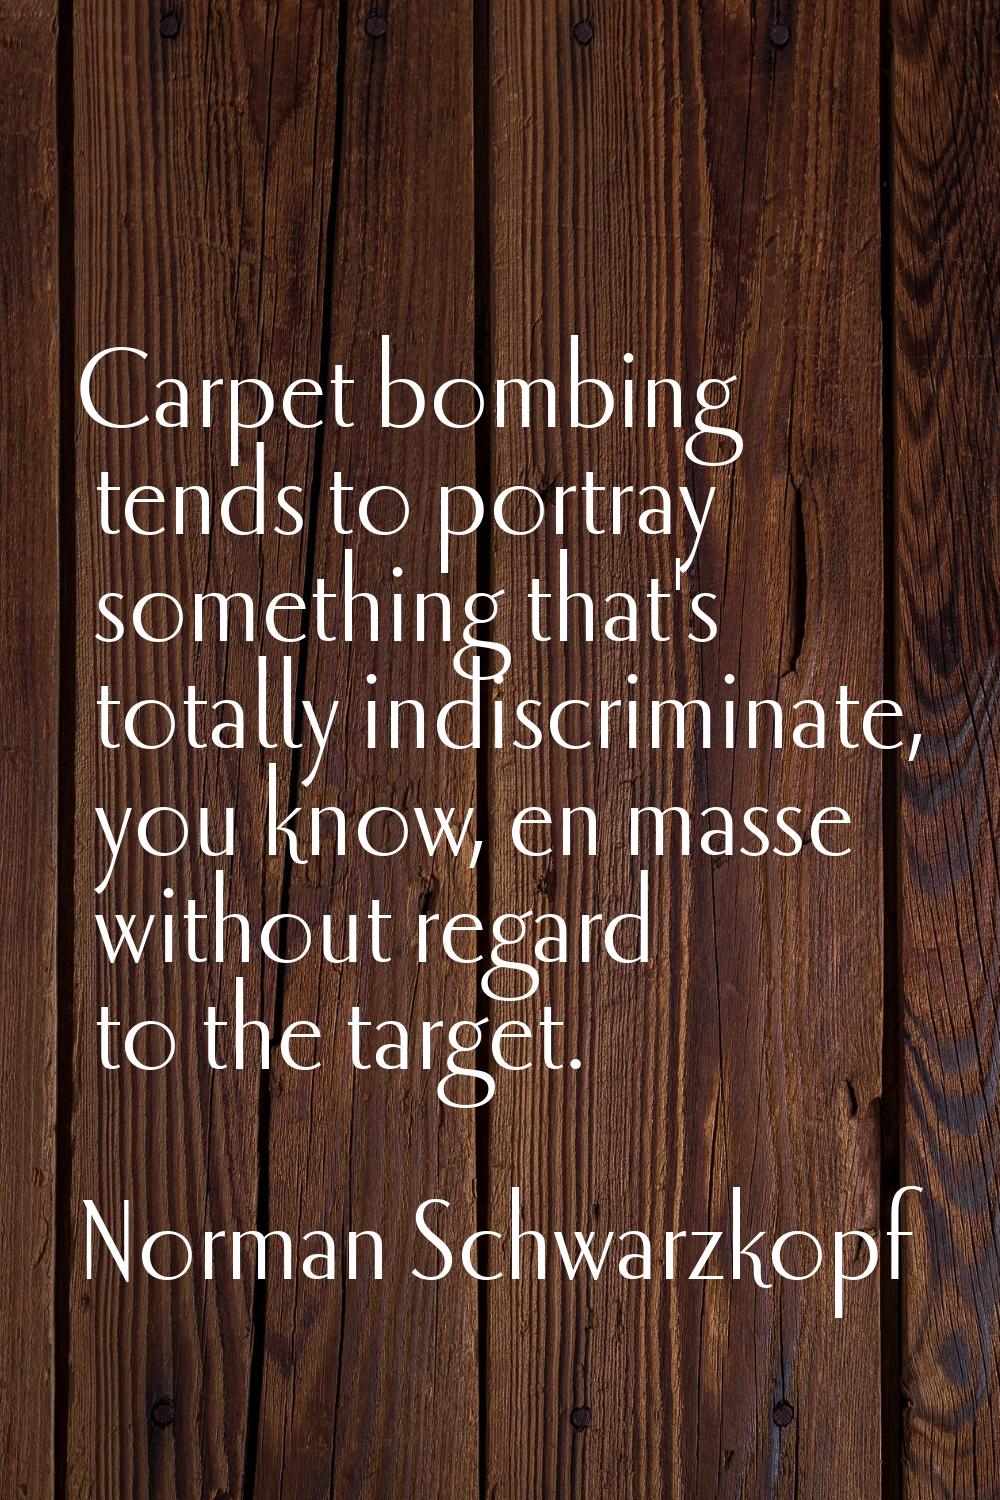 Carpet bombing tends to portray something that's totally indiscriminate, you know, en masse without